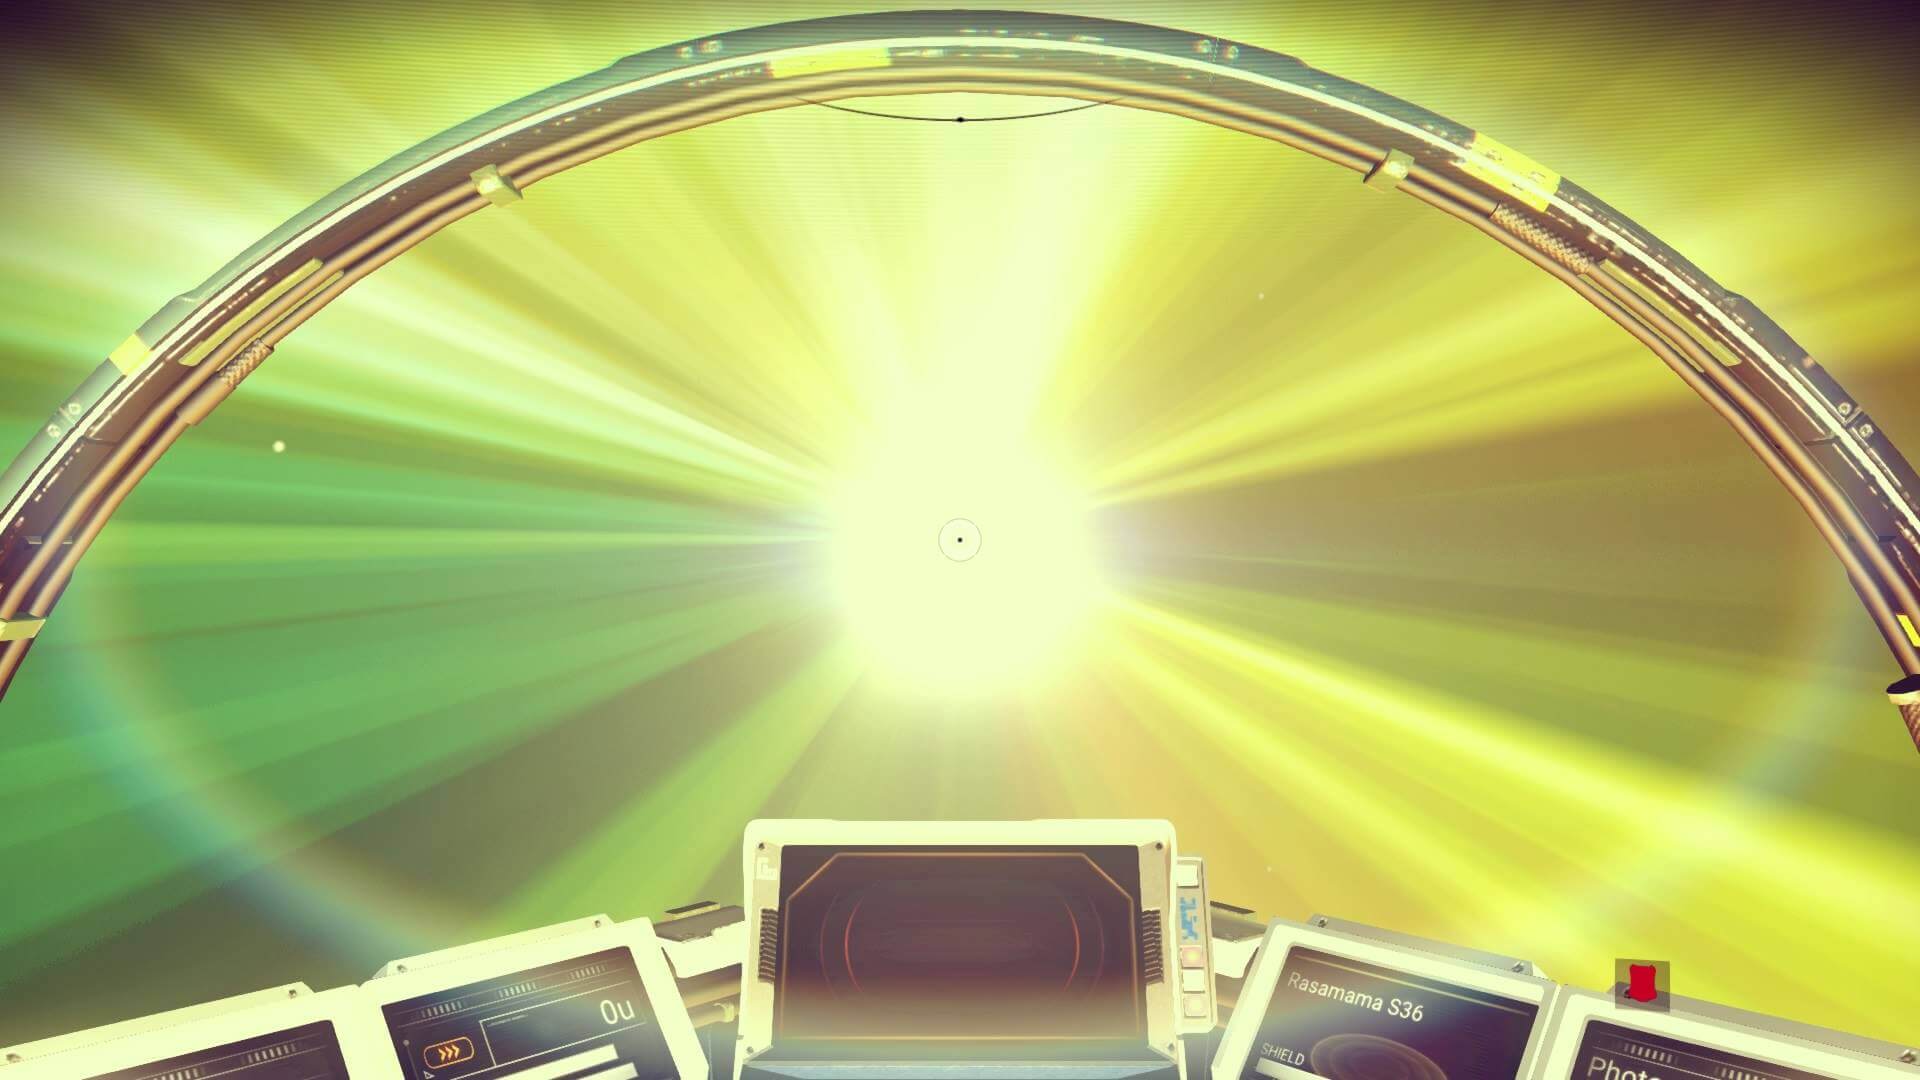 My first two hours with No Man's Sky